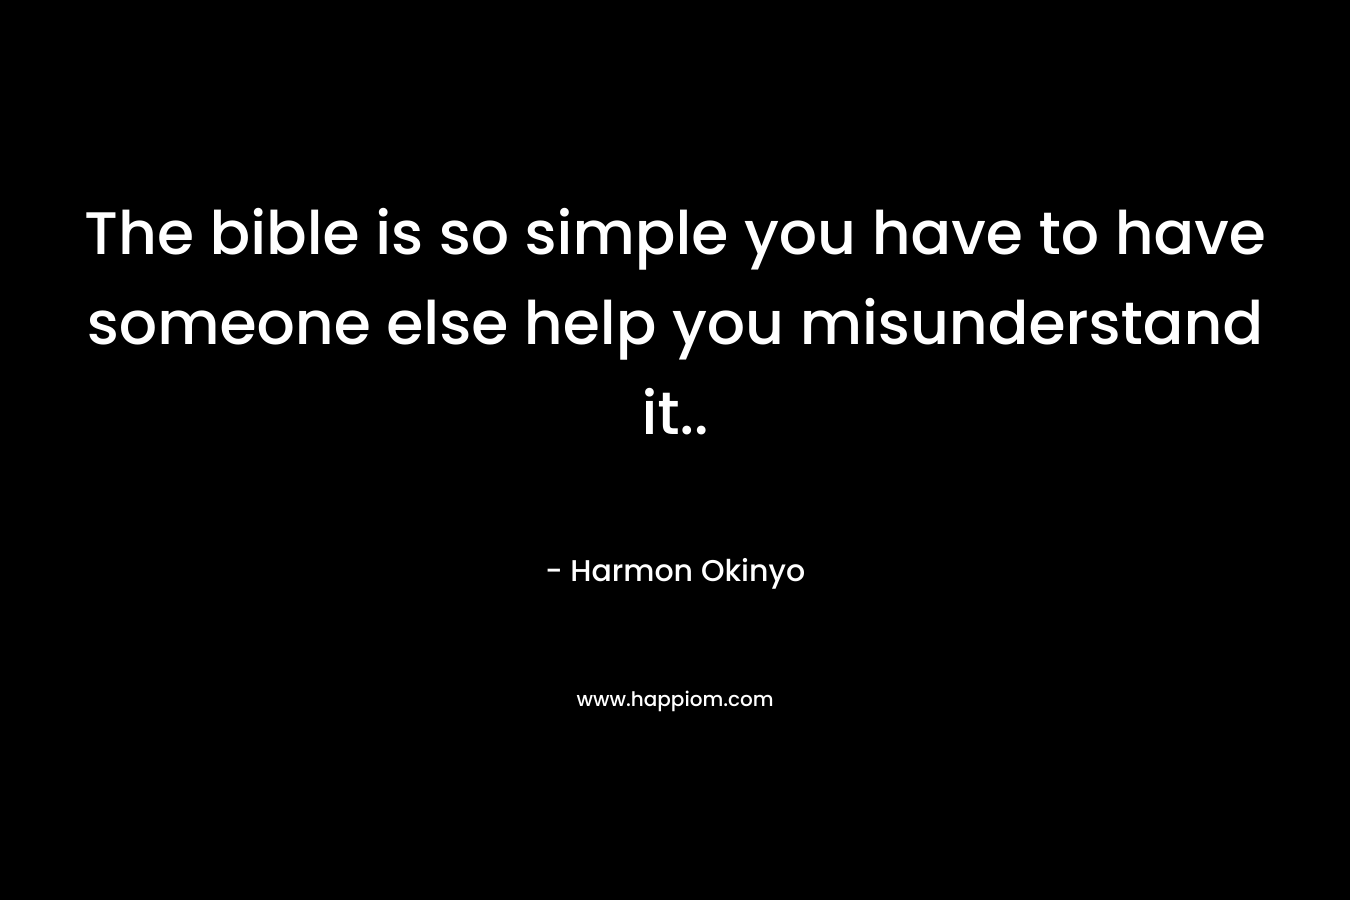 The bible is so simple you have to have someone else help you misunderstand it..